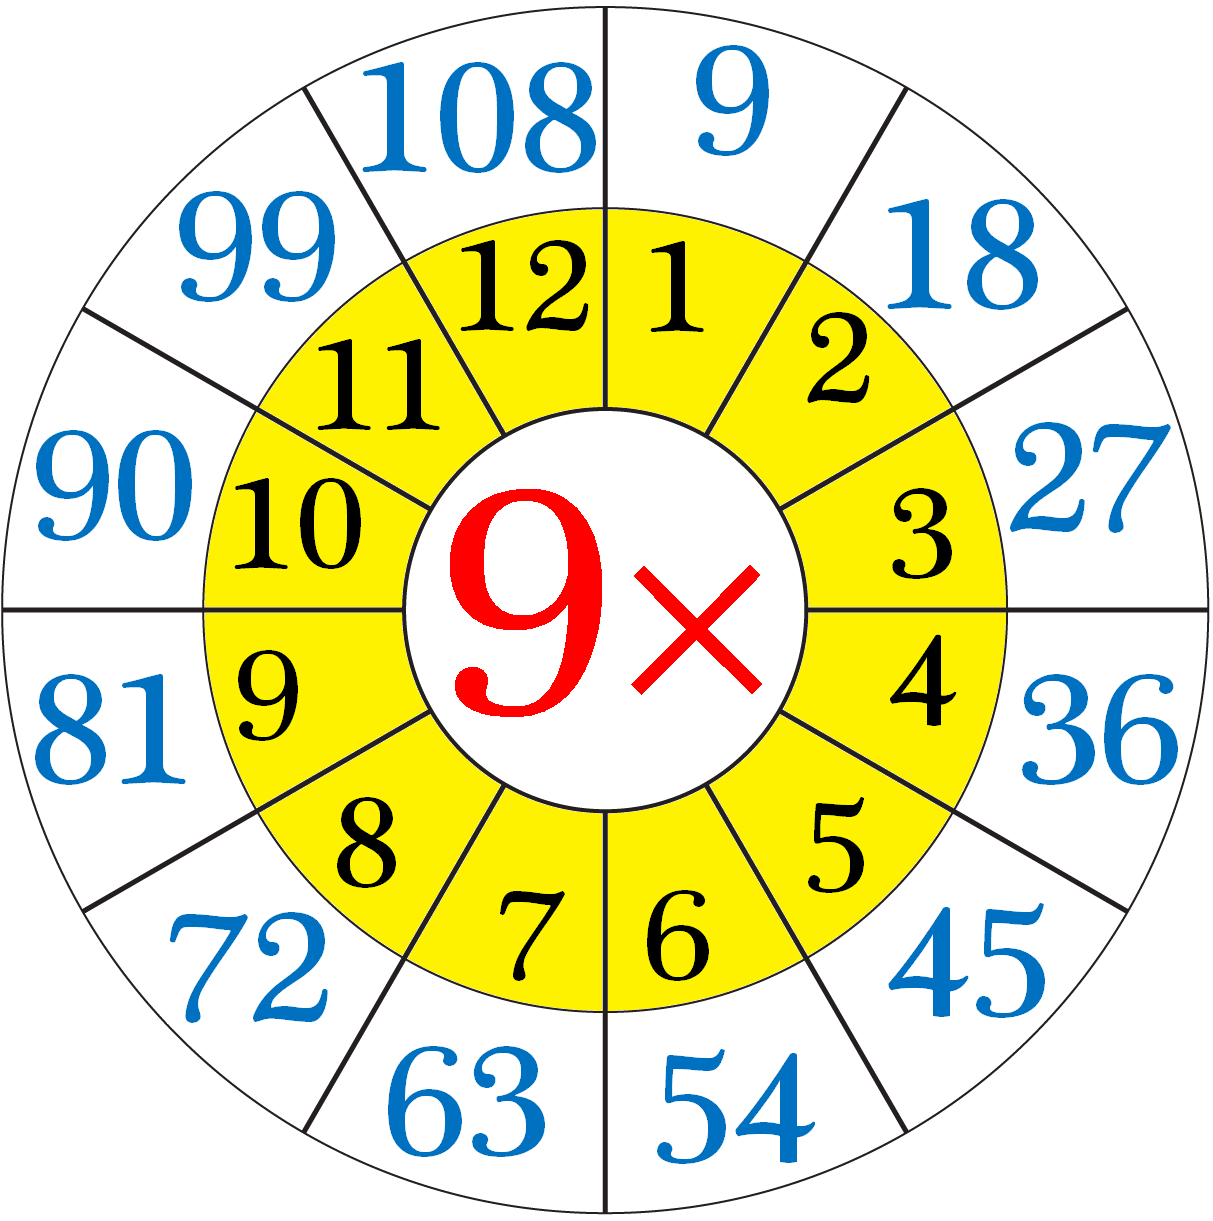 Multiplication Table of 9